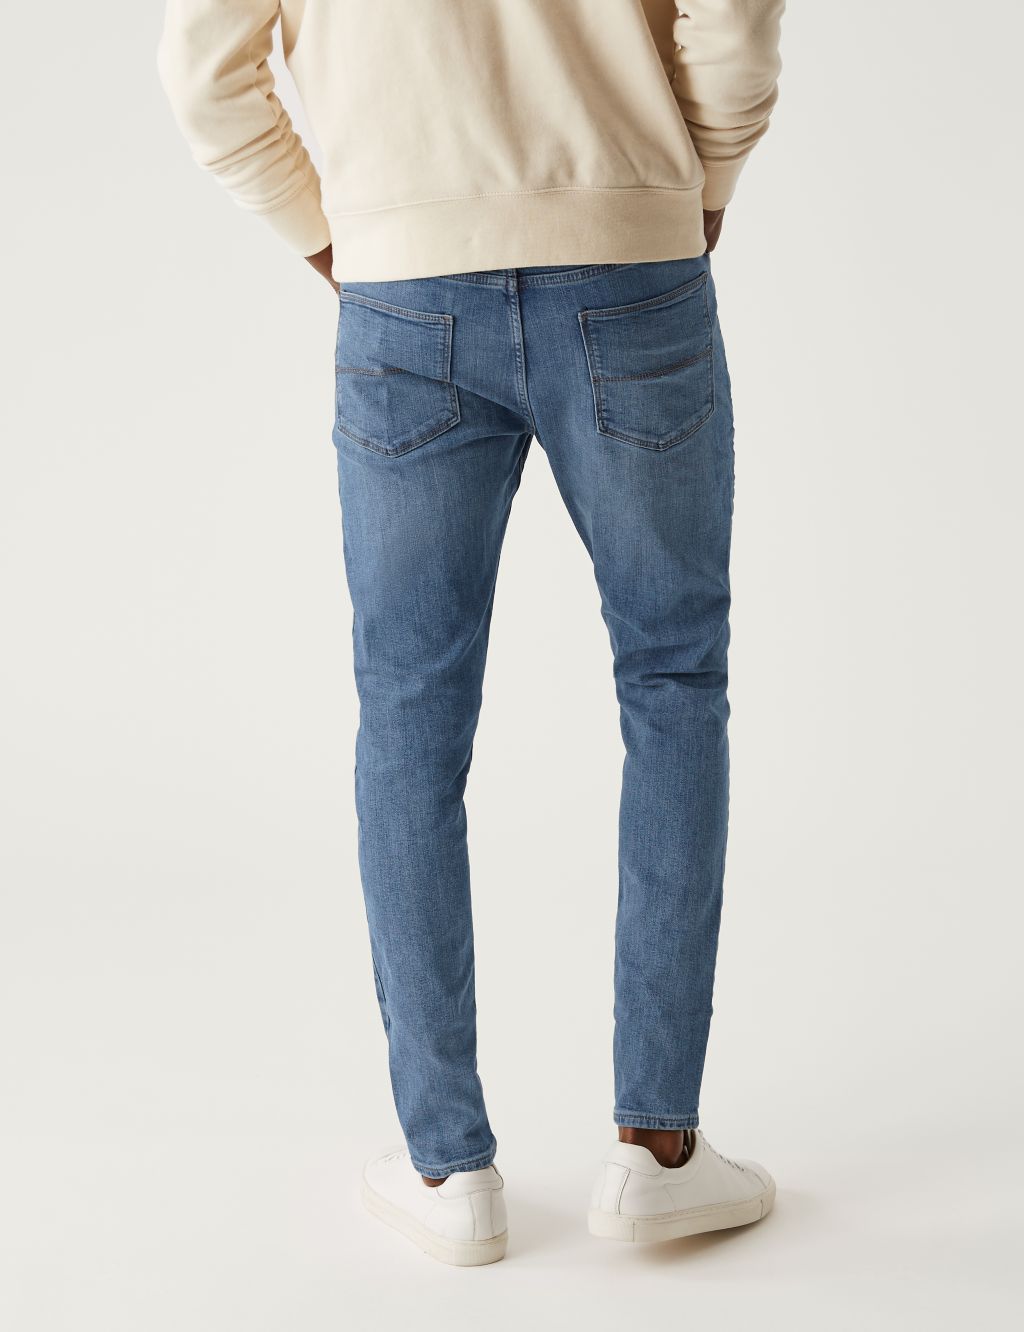 Skinny Fit Stretch Jeans image 5